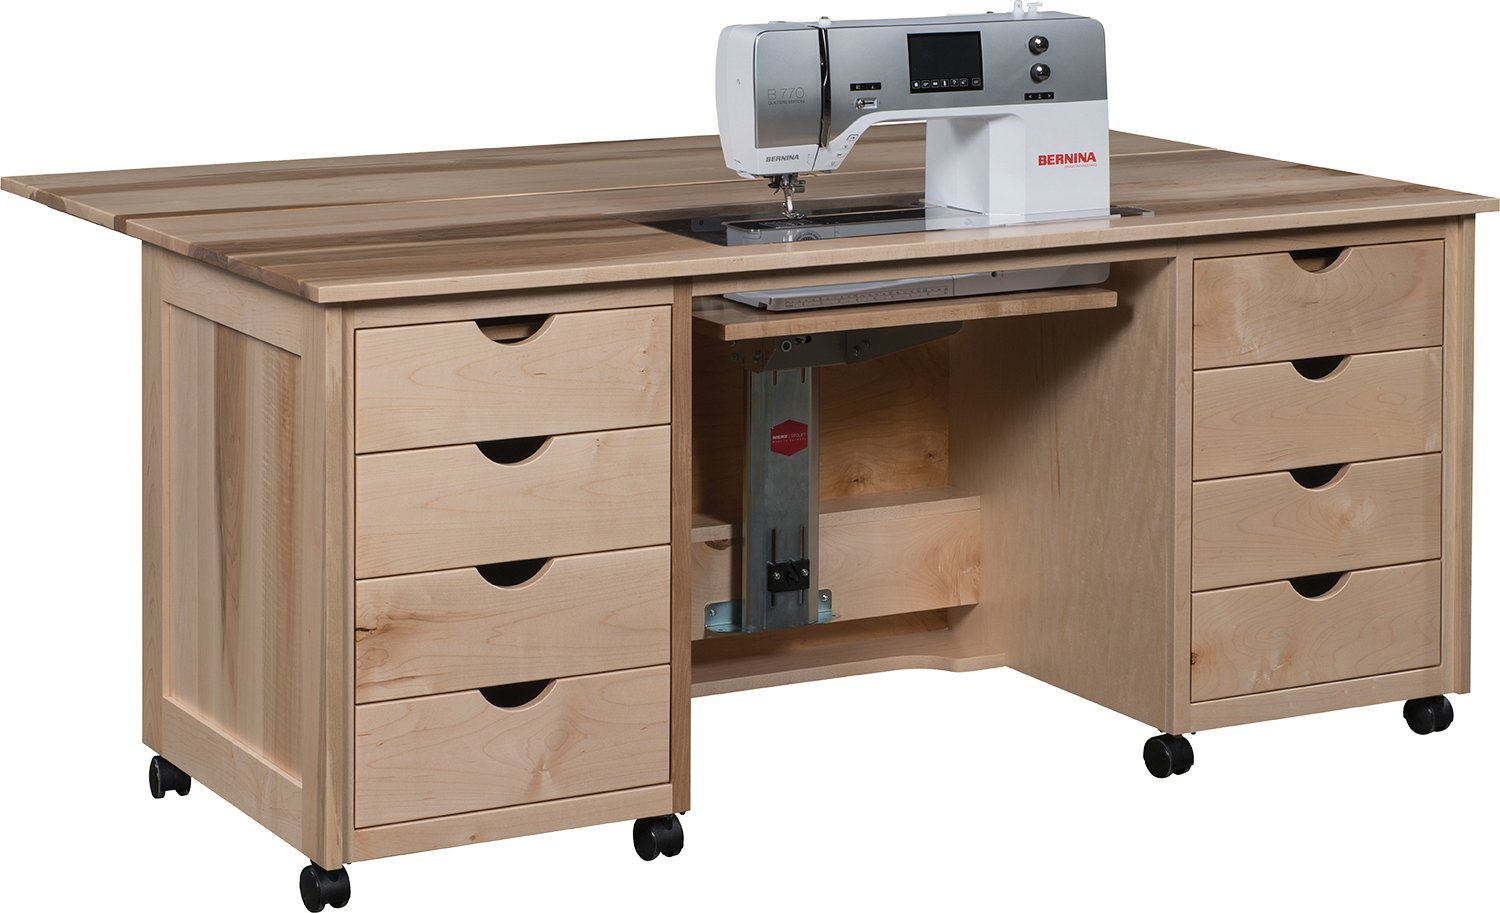  Sewing Tables For Sewing Machines